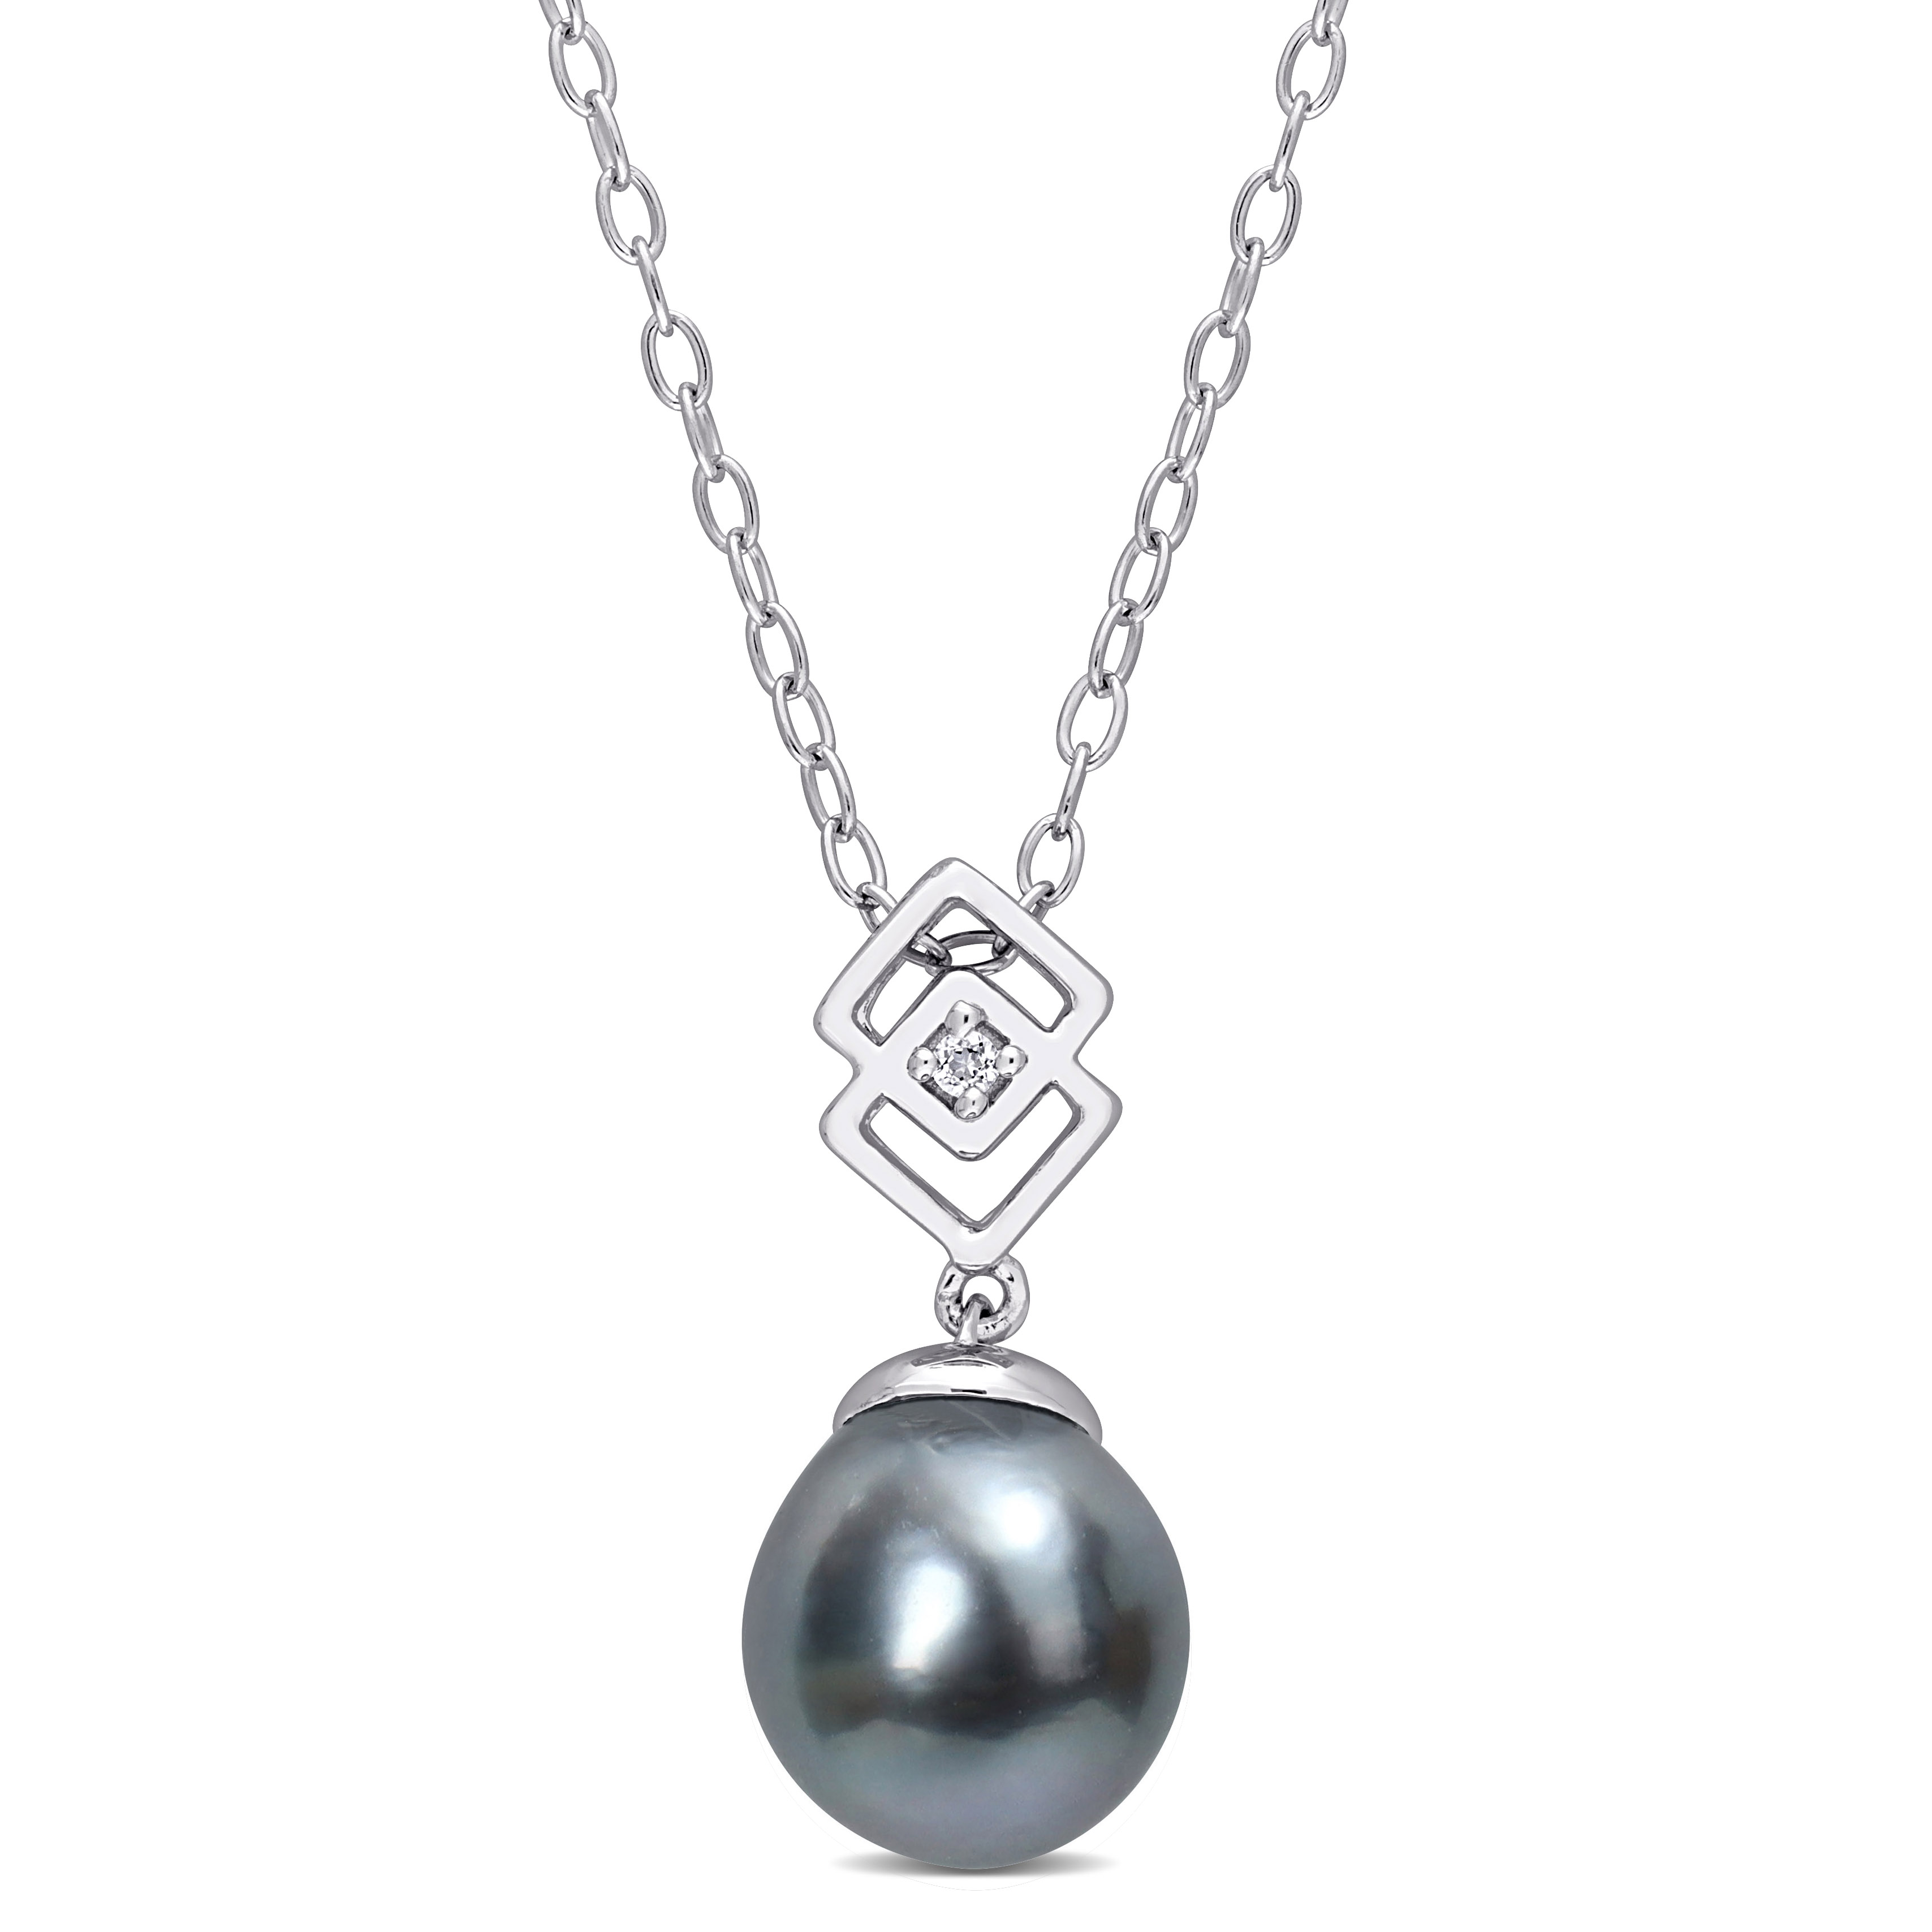 8-9 MM Black Tahitian Cultured Pearl and White Topaz Lozenge Drop Pendant with Chain in Sterling Silver